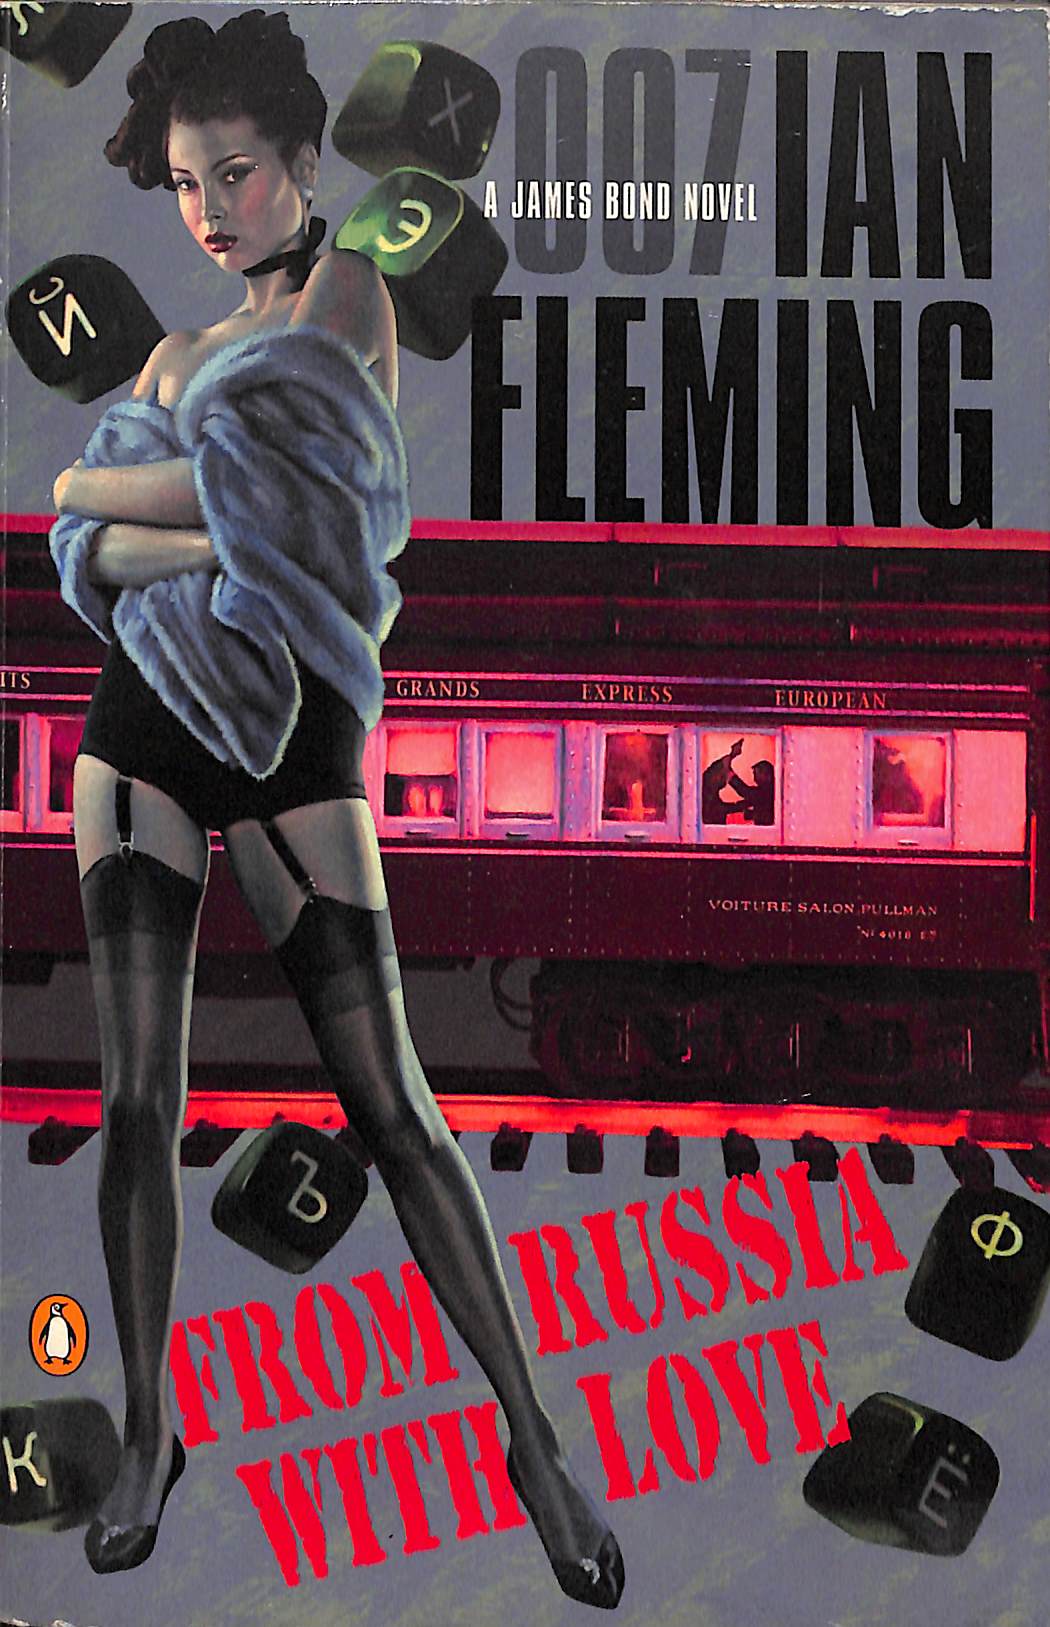 "From Russia With Love" 2003 FLEMING, Ian